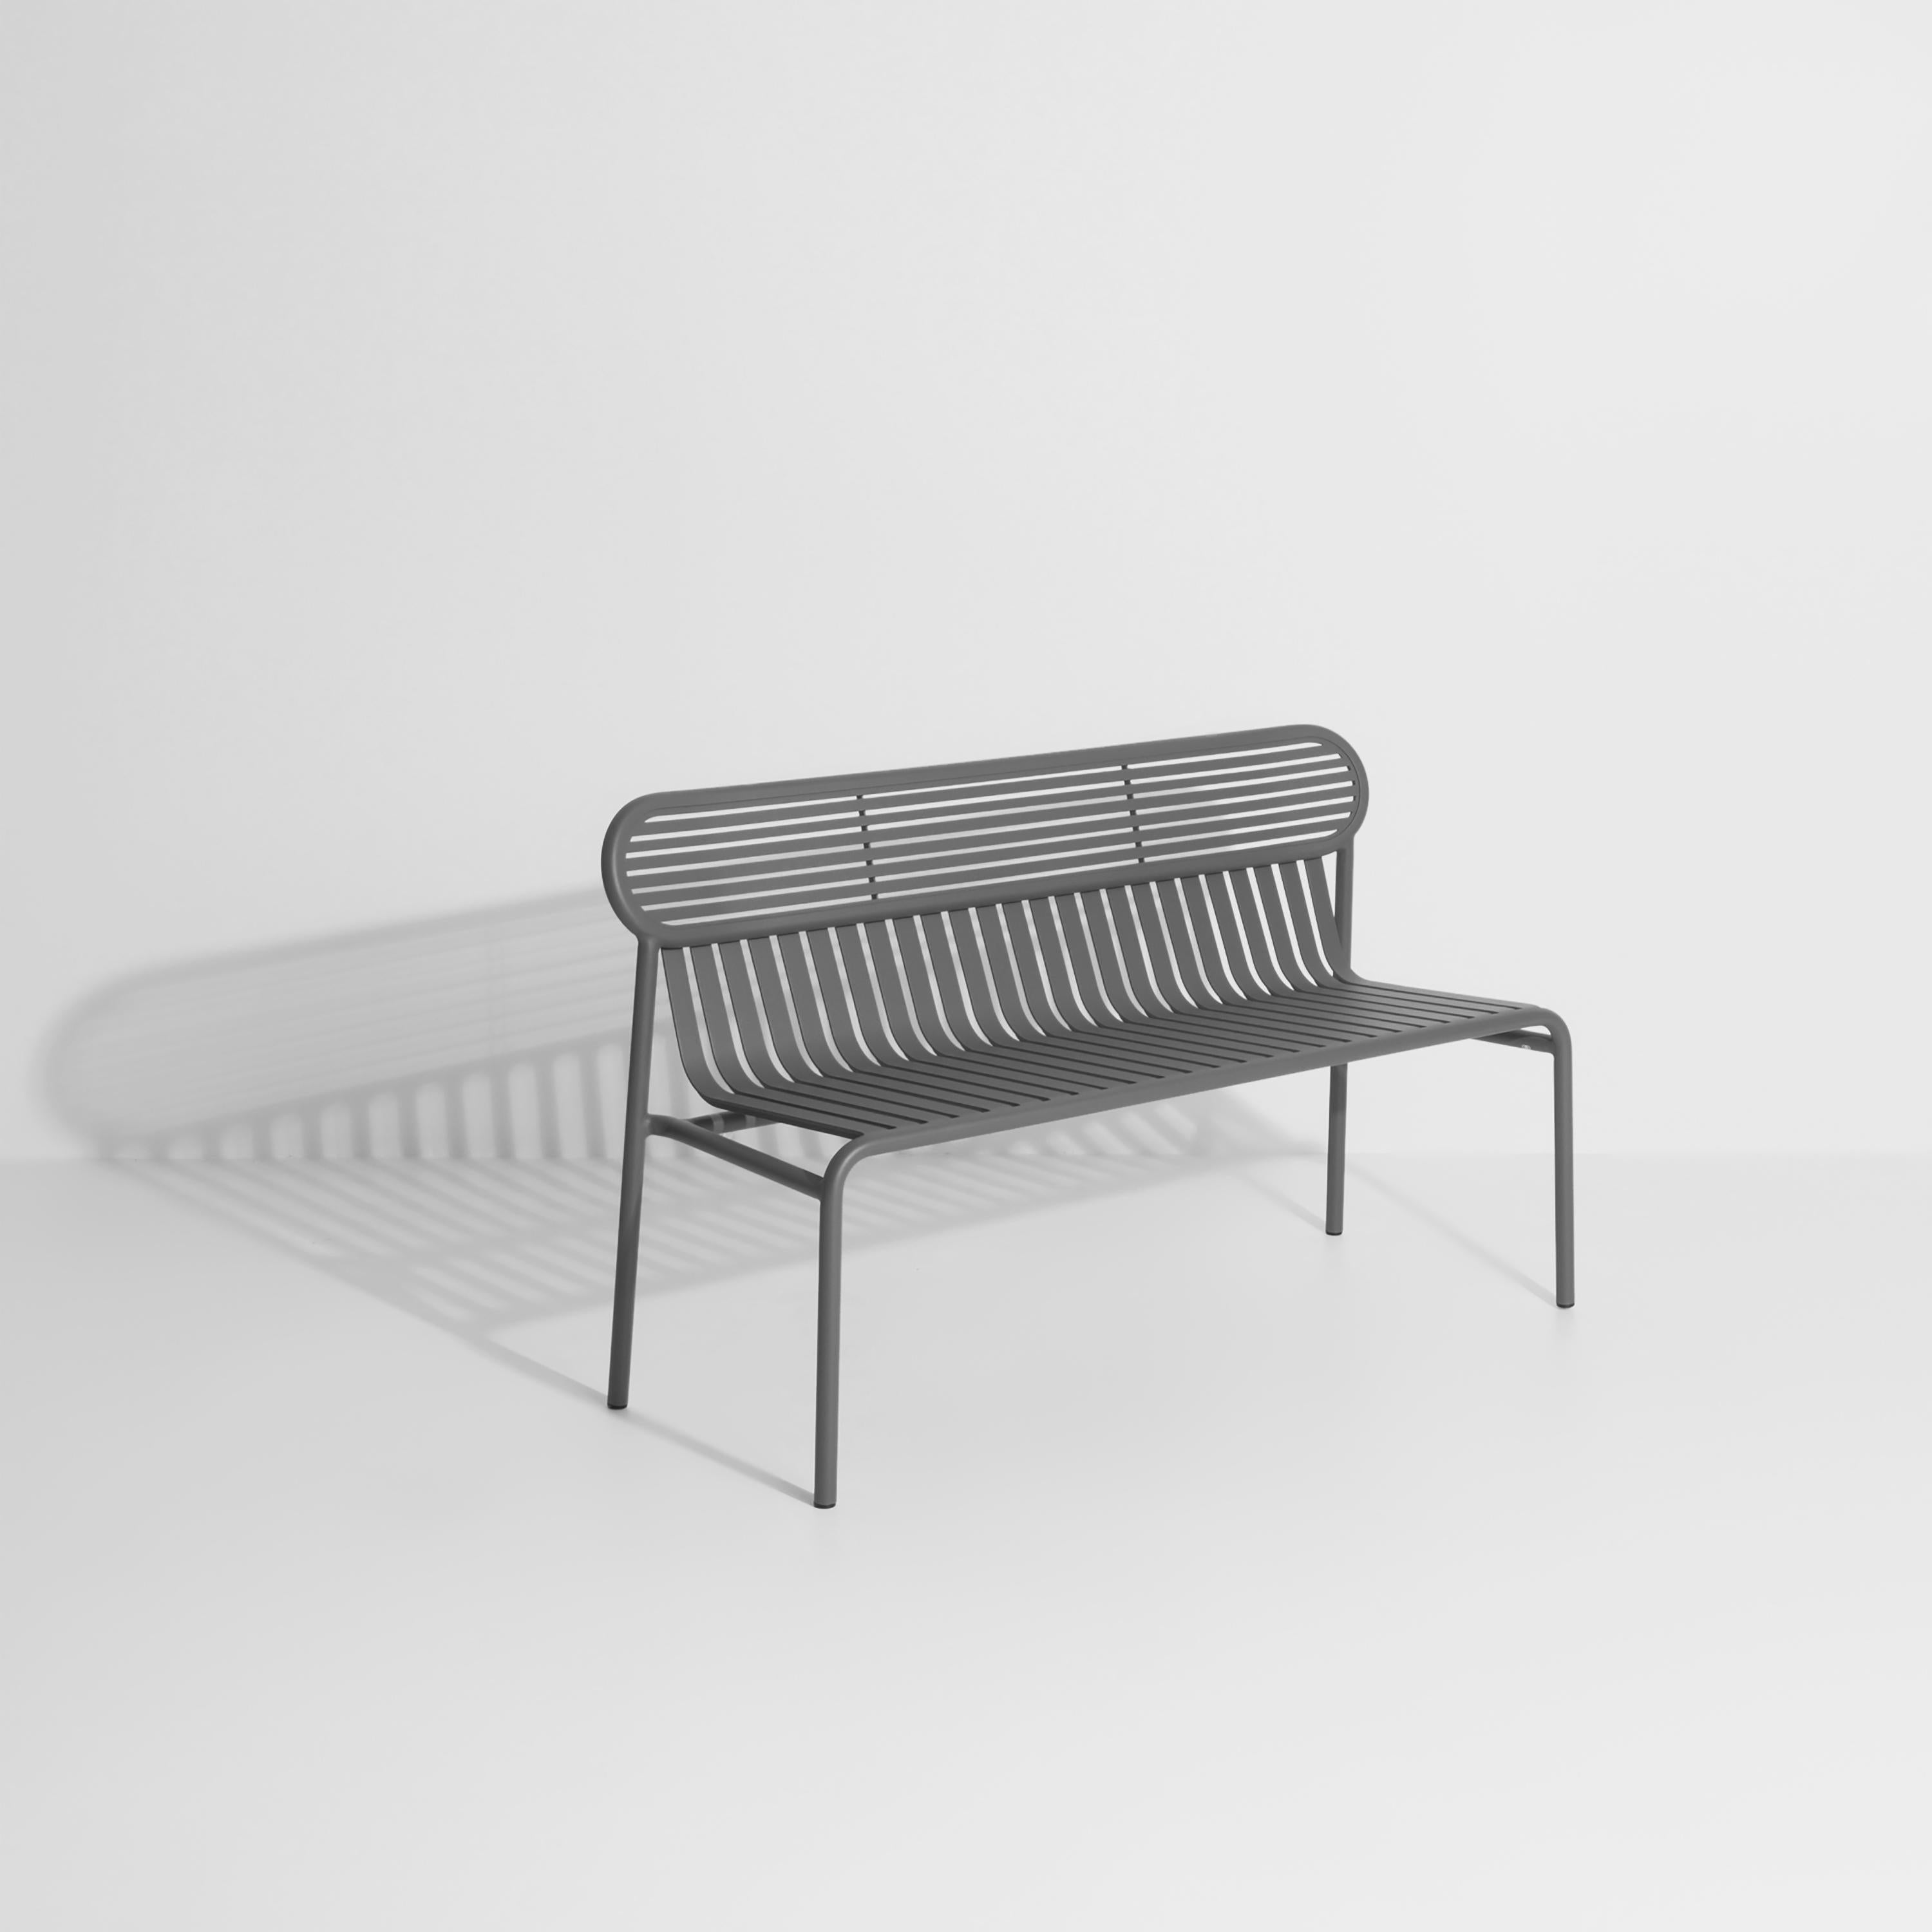 Petite Friture Week-End Bench in Anthracite Aluminium by Studio BrichetZiegler, 2017

The week-end collection is a full range of outdoor furniture, in aluminium grained epoxy paint, matt finish, that includes 18 functions and 8 colours for the